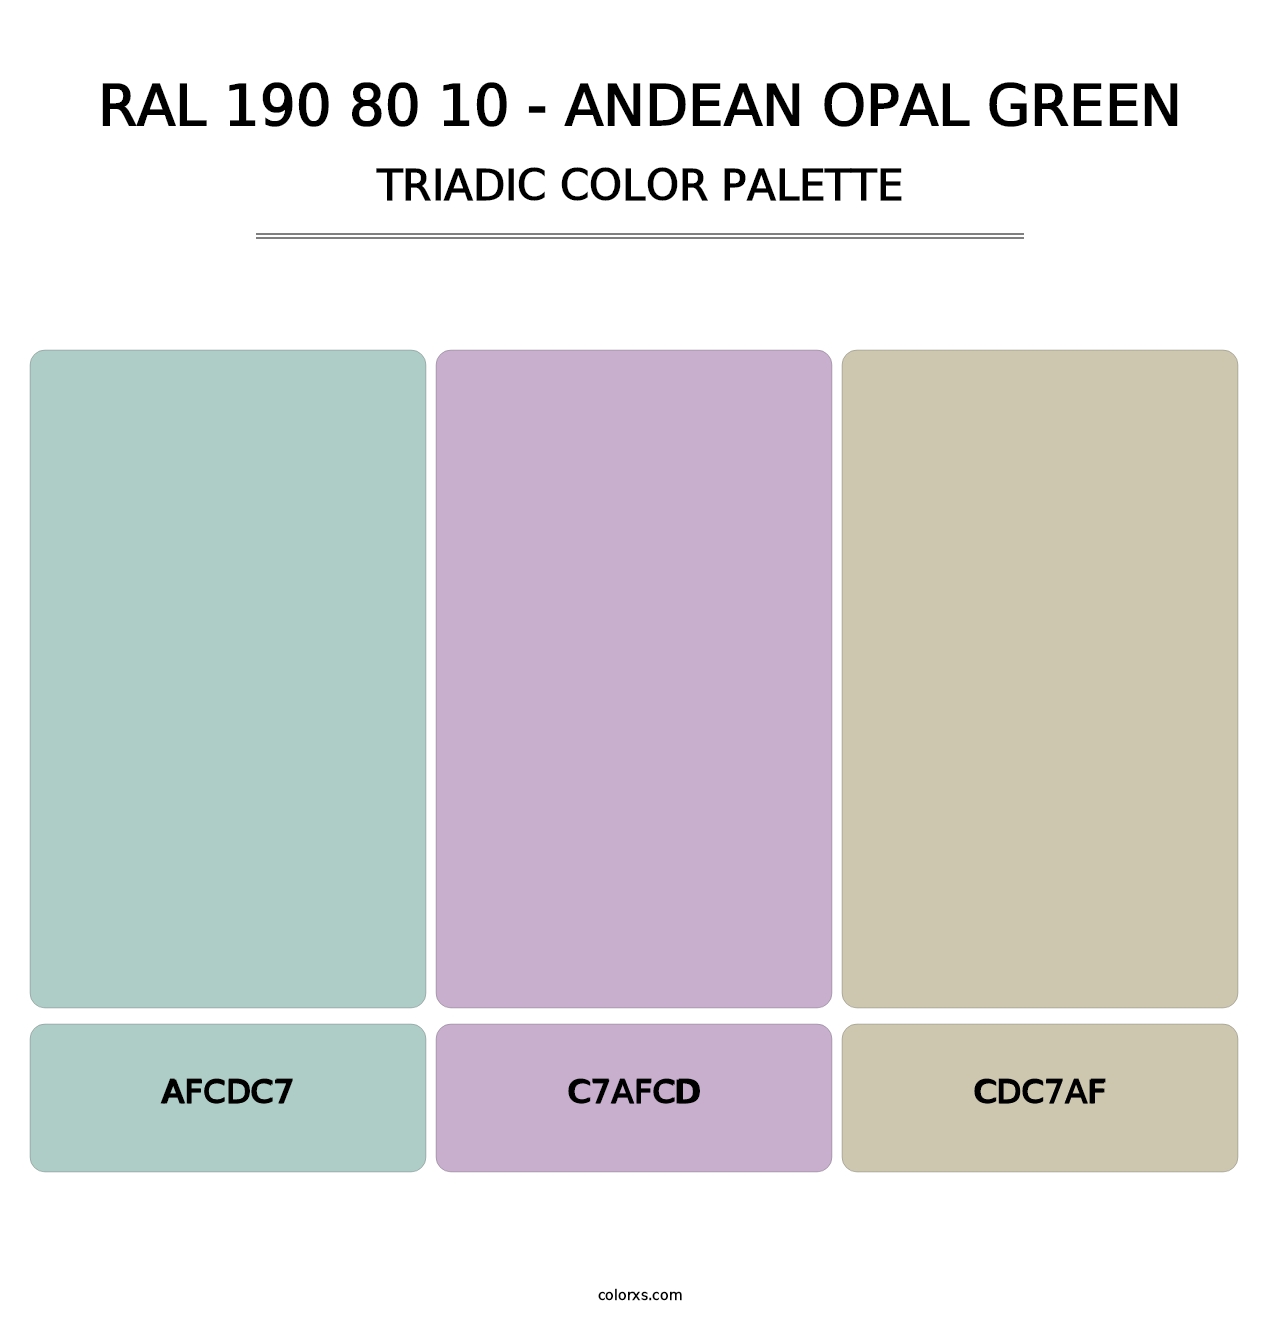 RAL 190 80 10 - Andean Opal Green - Triadic Color Palette